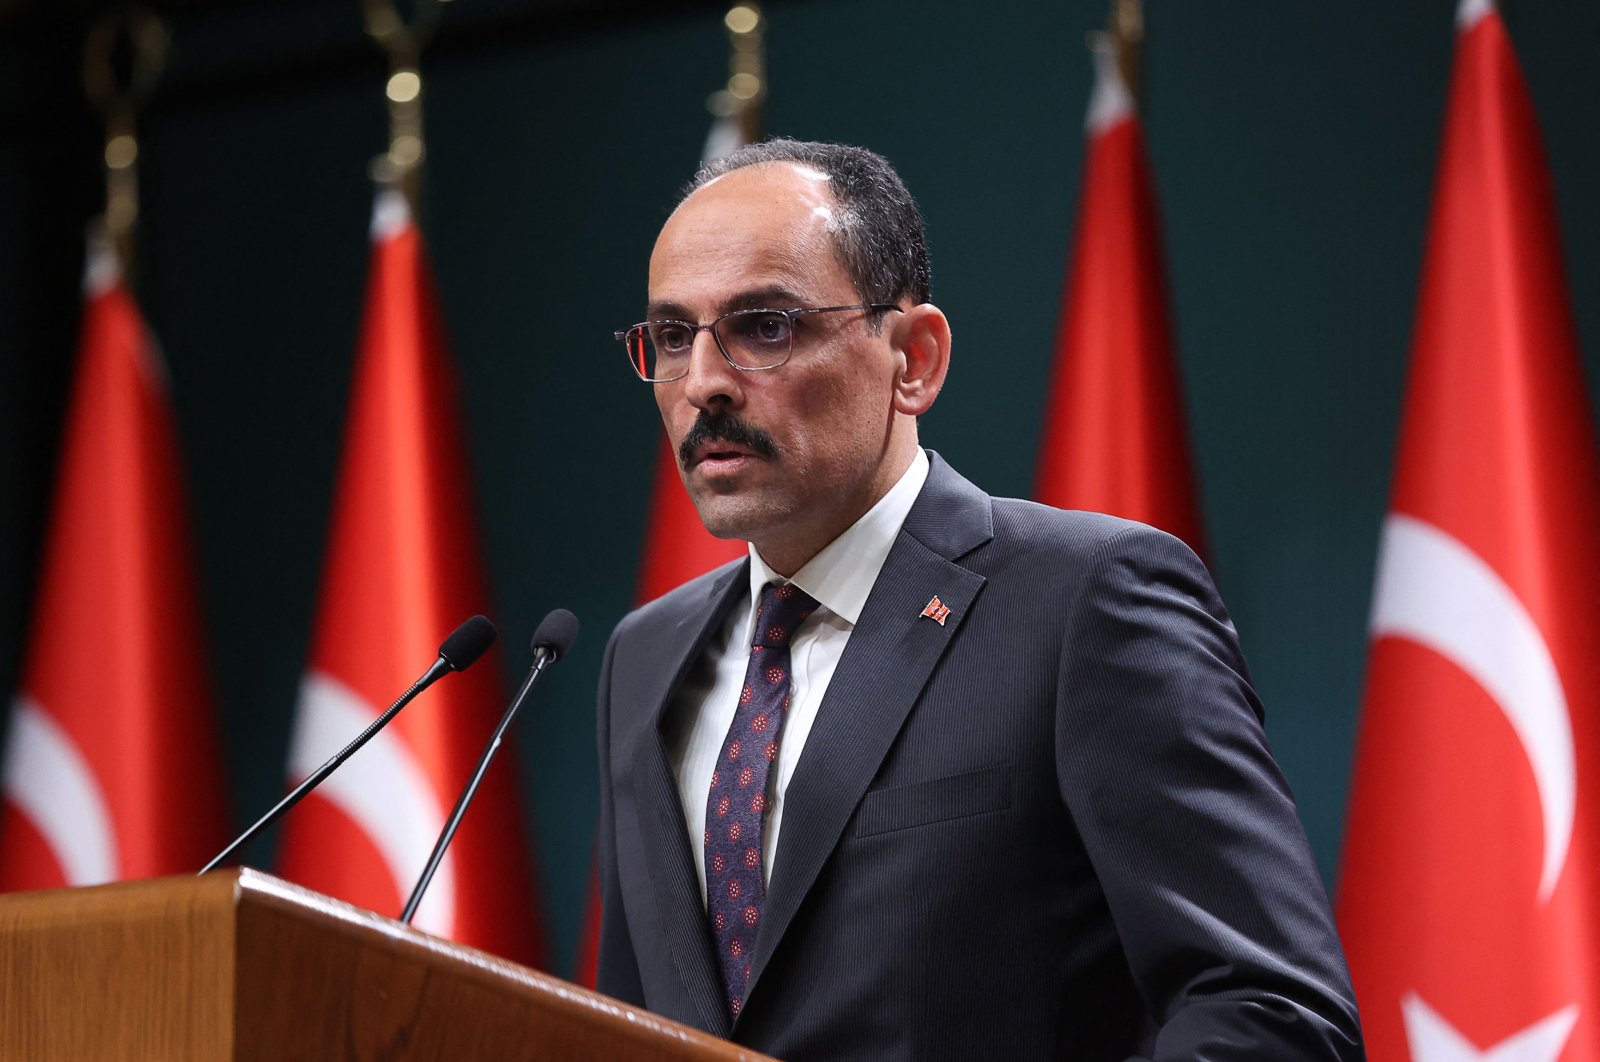 Turkish Presidential spokesperson Ibrahim Kalin gives a press conference following talks with Sweden and Finland over their bids to join NATO at the Presidential Complex in Ankara, Turkey, May 25, 2022. (AFP Photo)